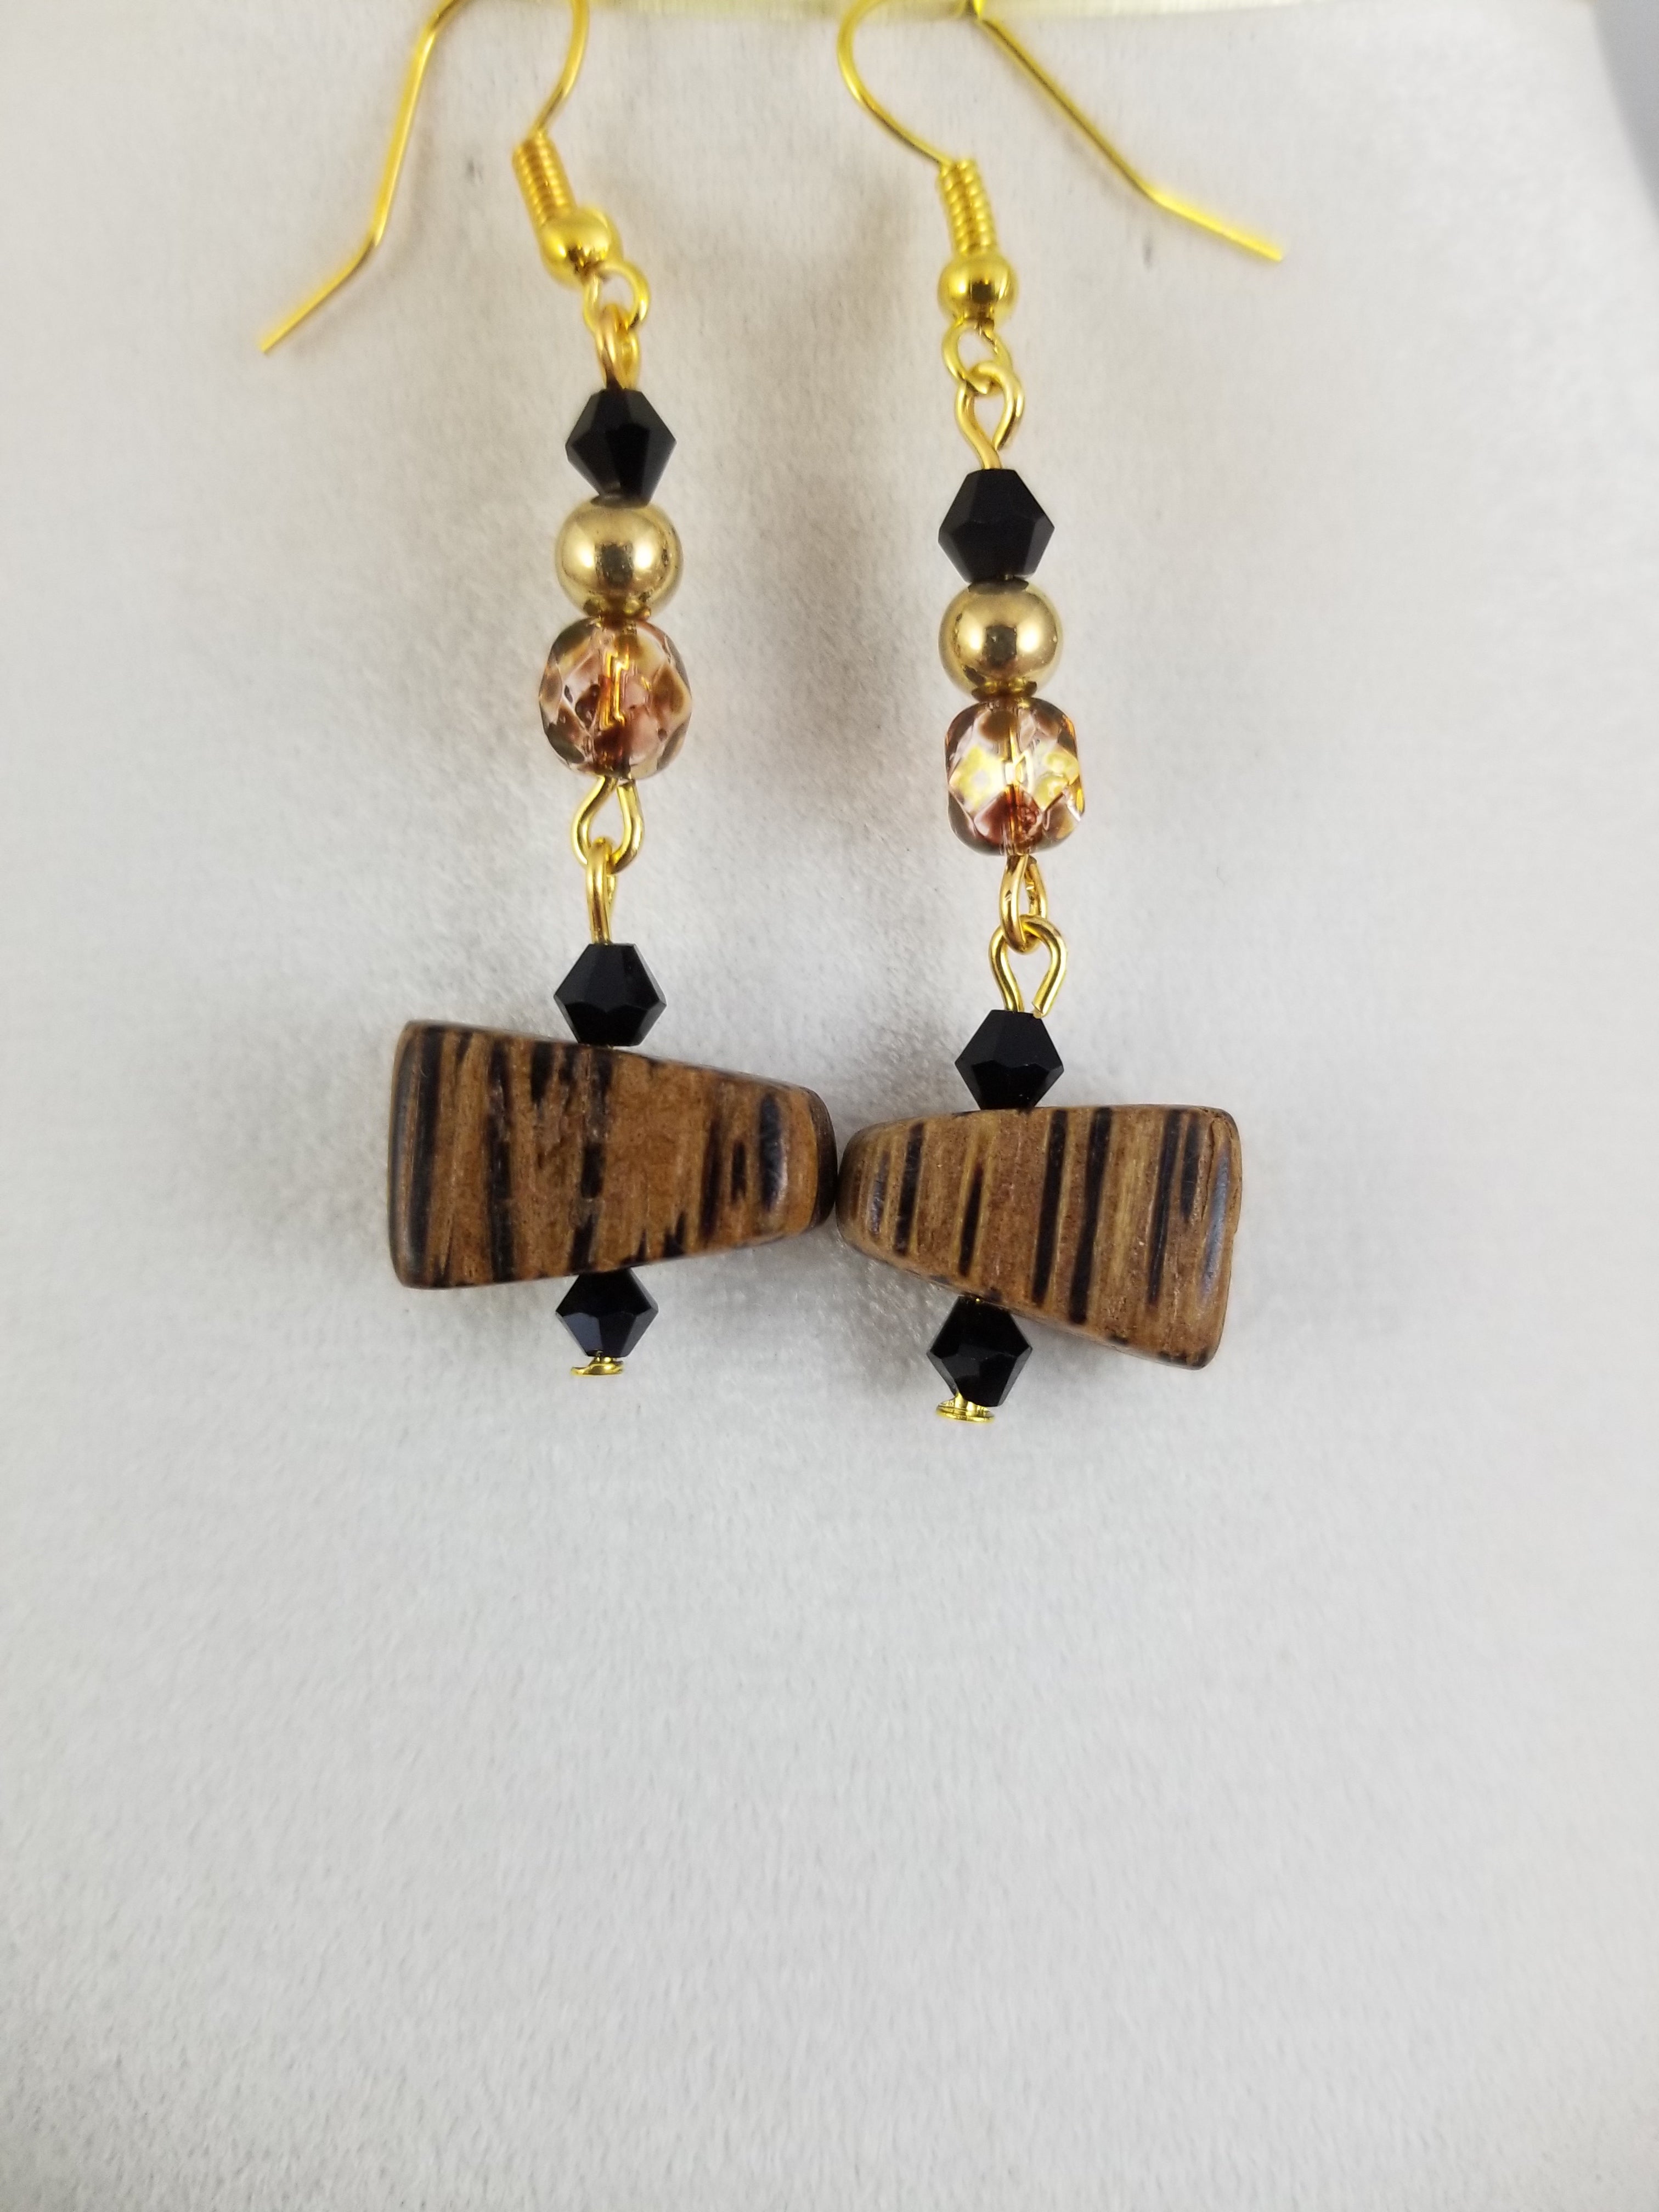 Zebra Wood Necklace with Earrings